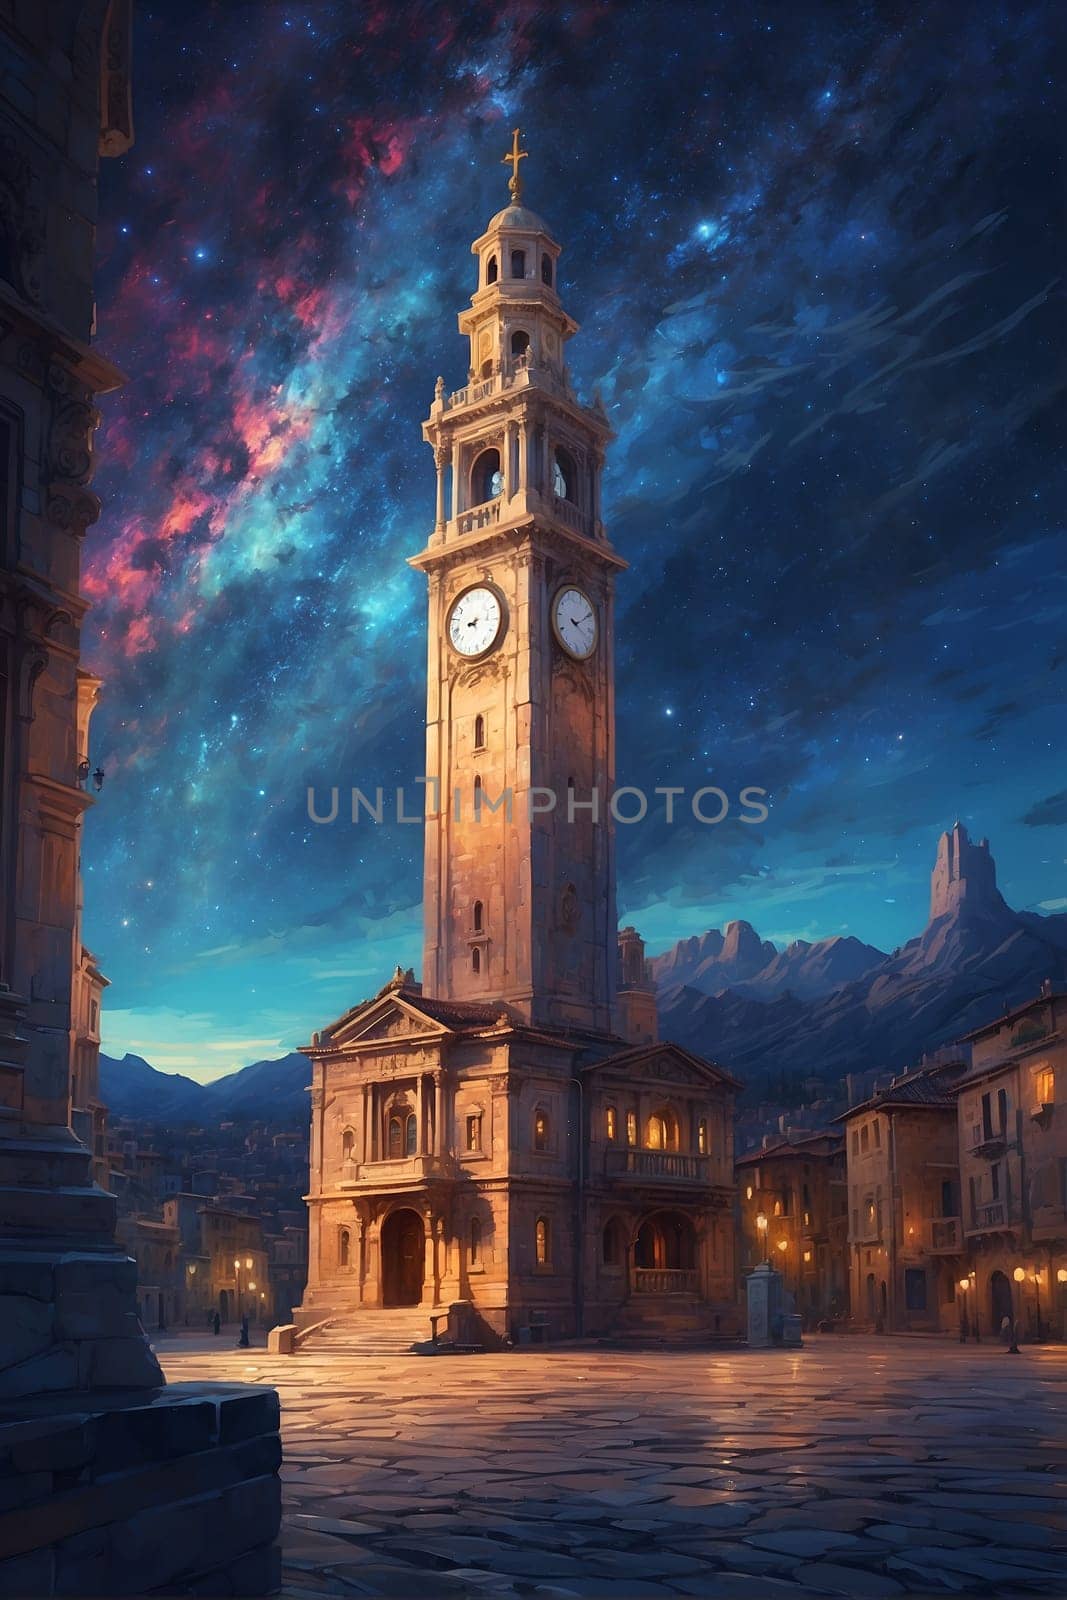 A captivating painting of a clock tower standing tall amidst the bustling streets of a town.